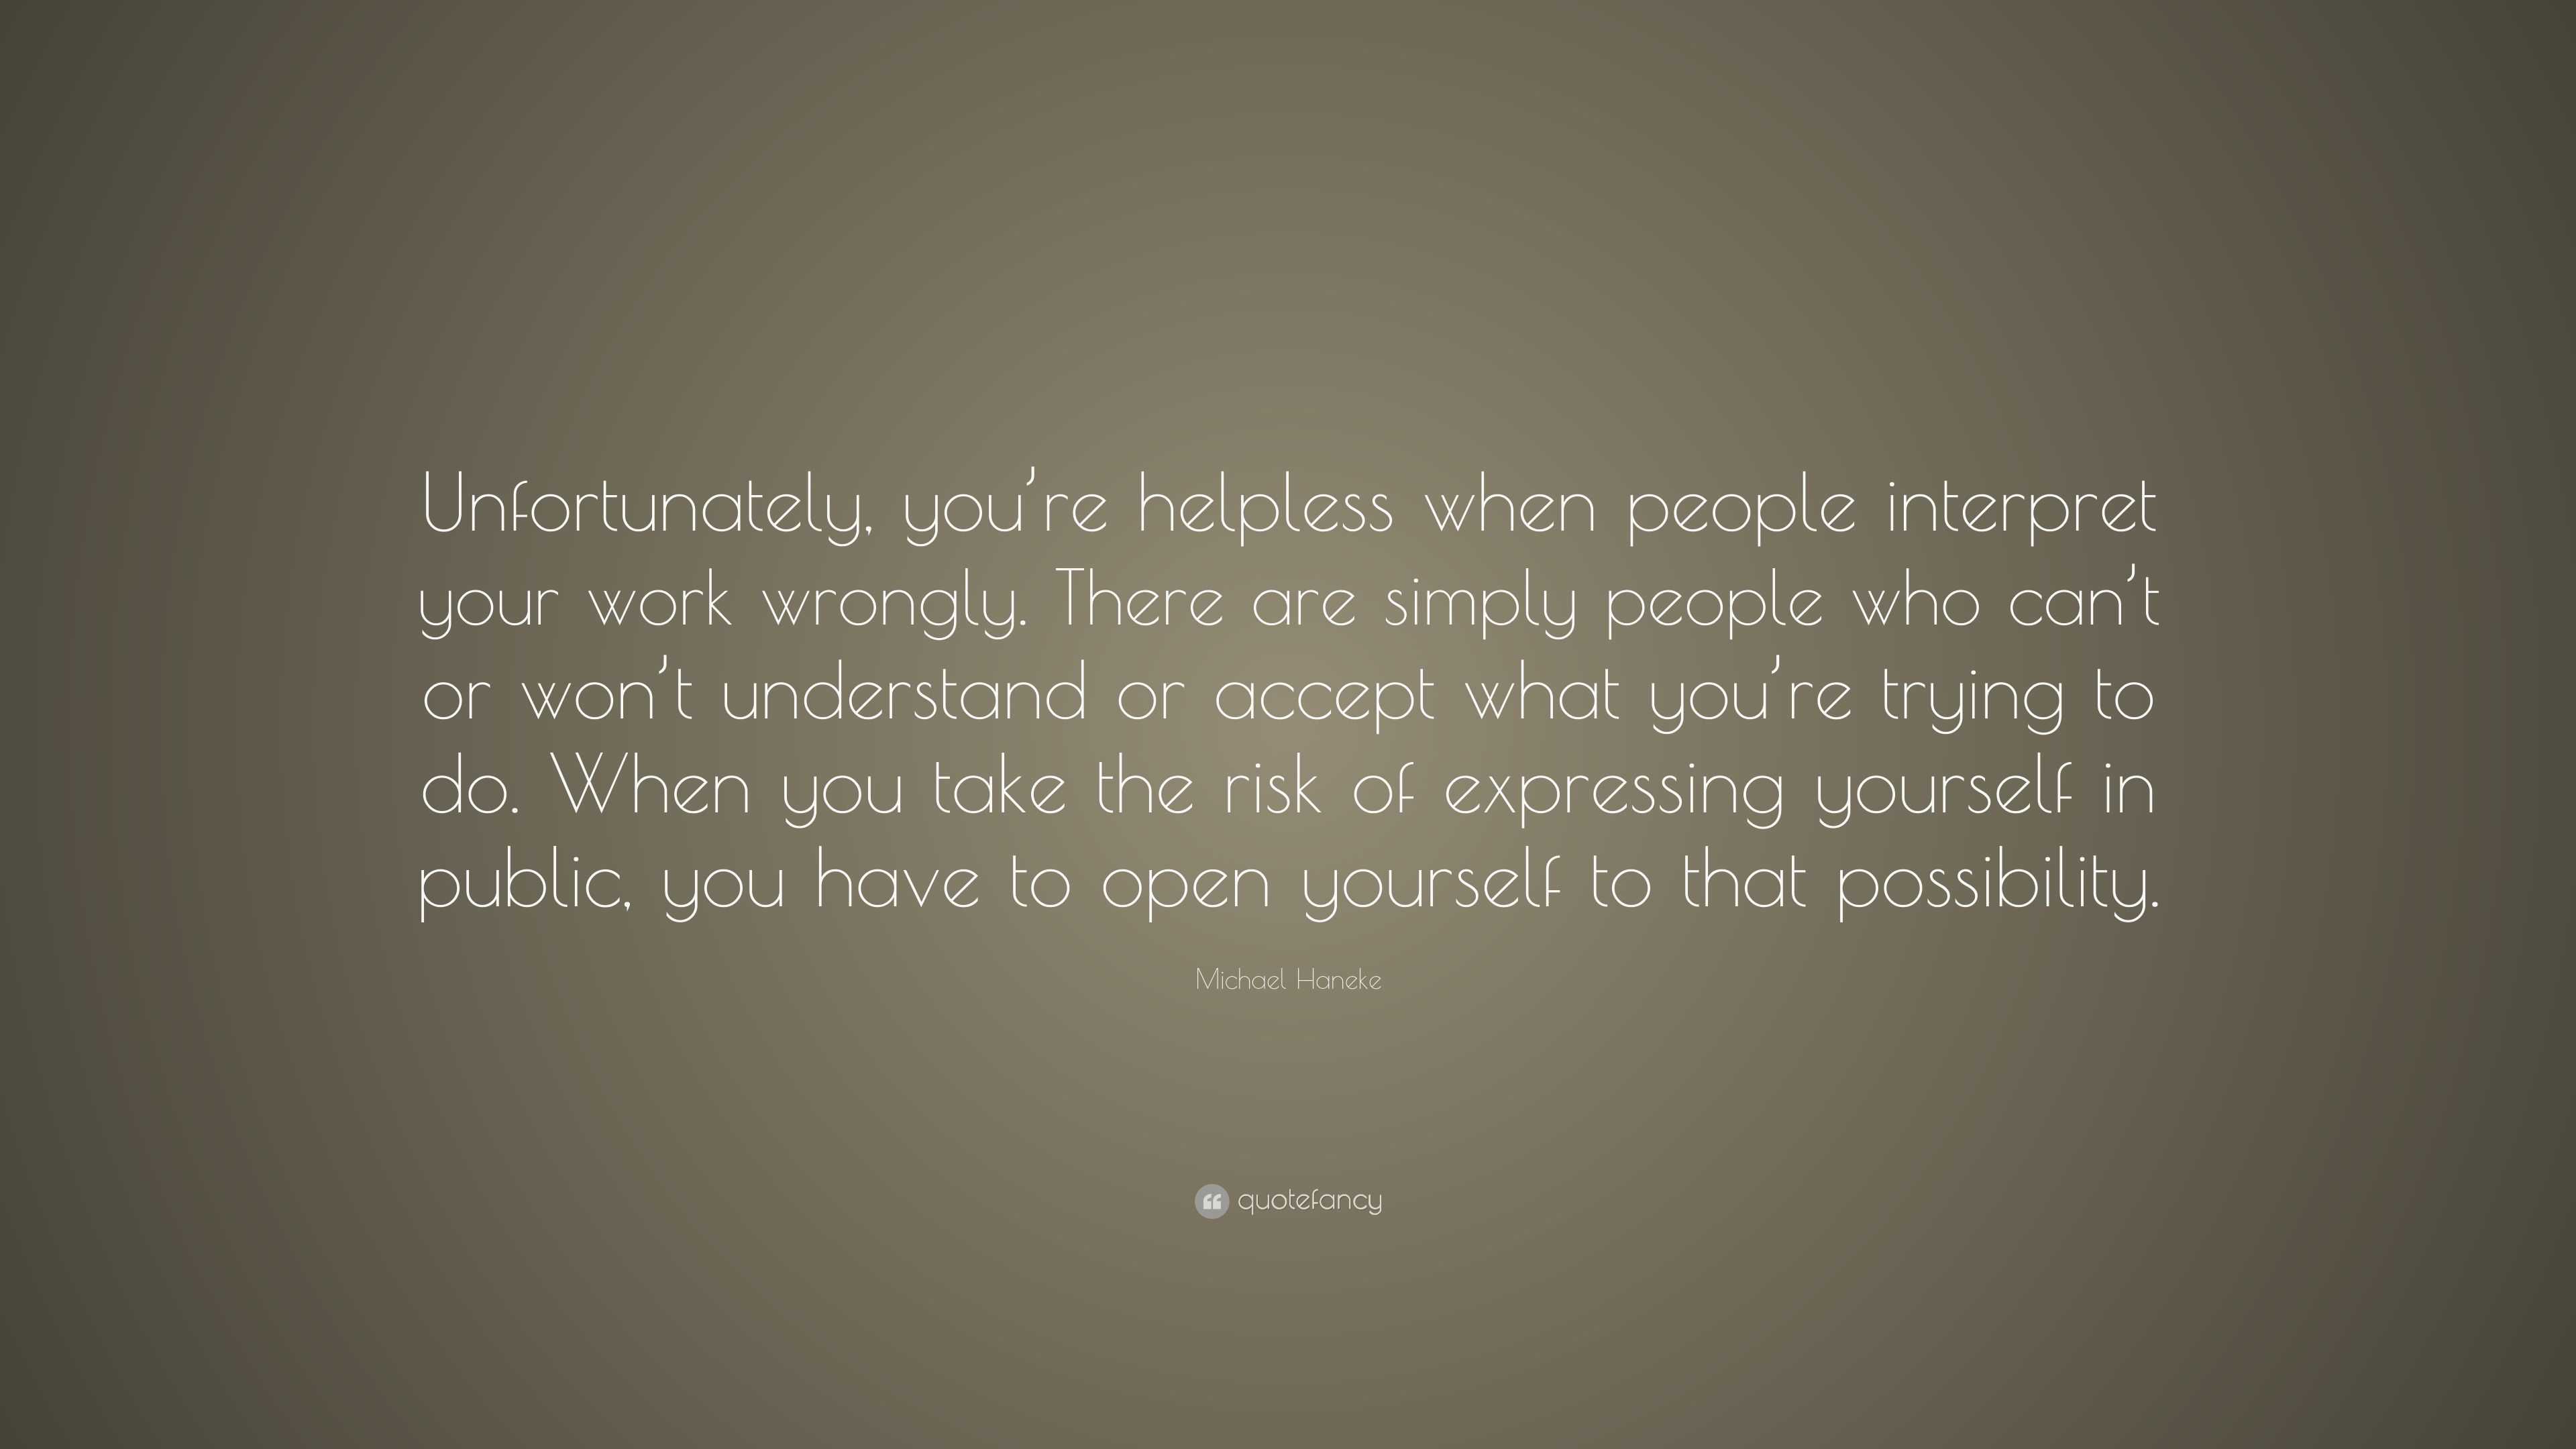 Michael Haneke Quote: “Unfortunately, you’re helpless when people ...